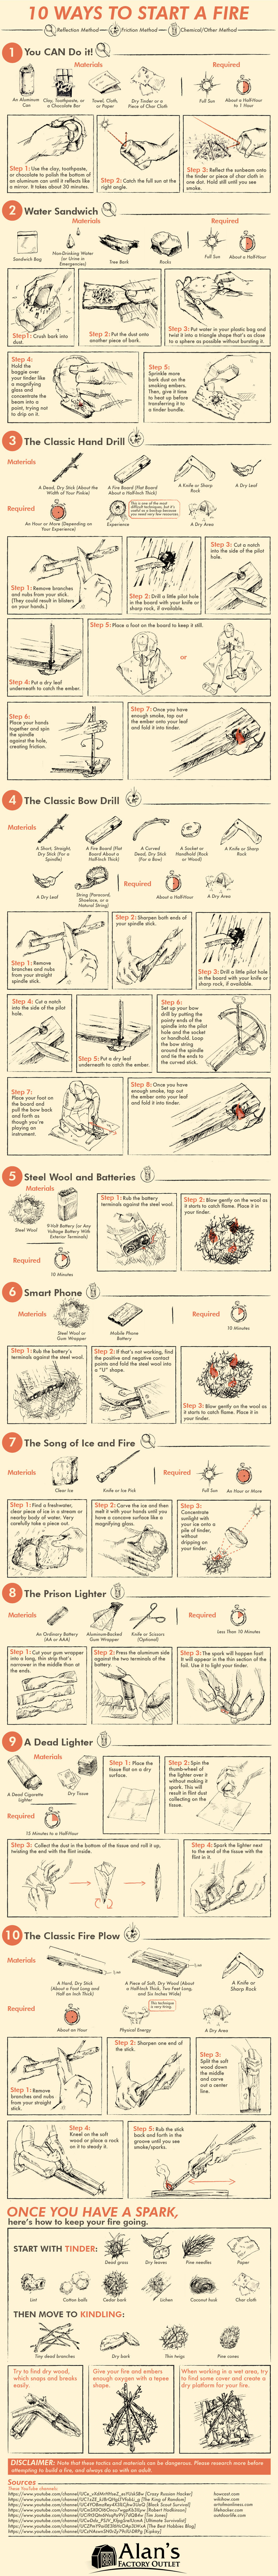 10 Ways To Start A Fire Without A Lighter Or Matches